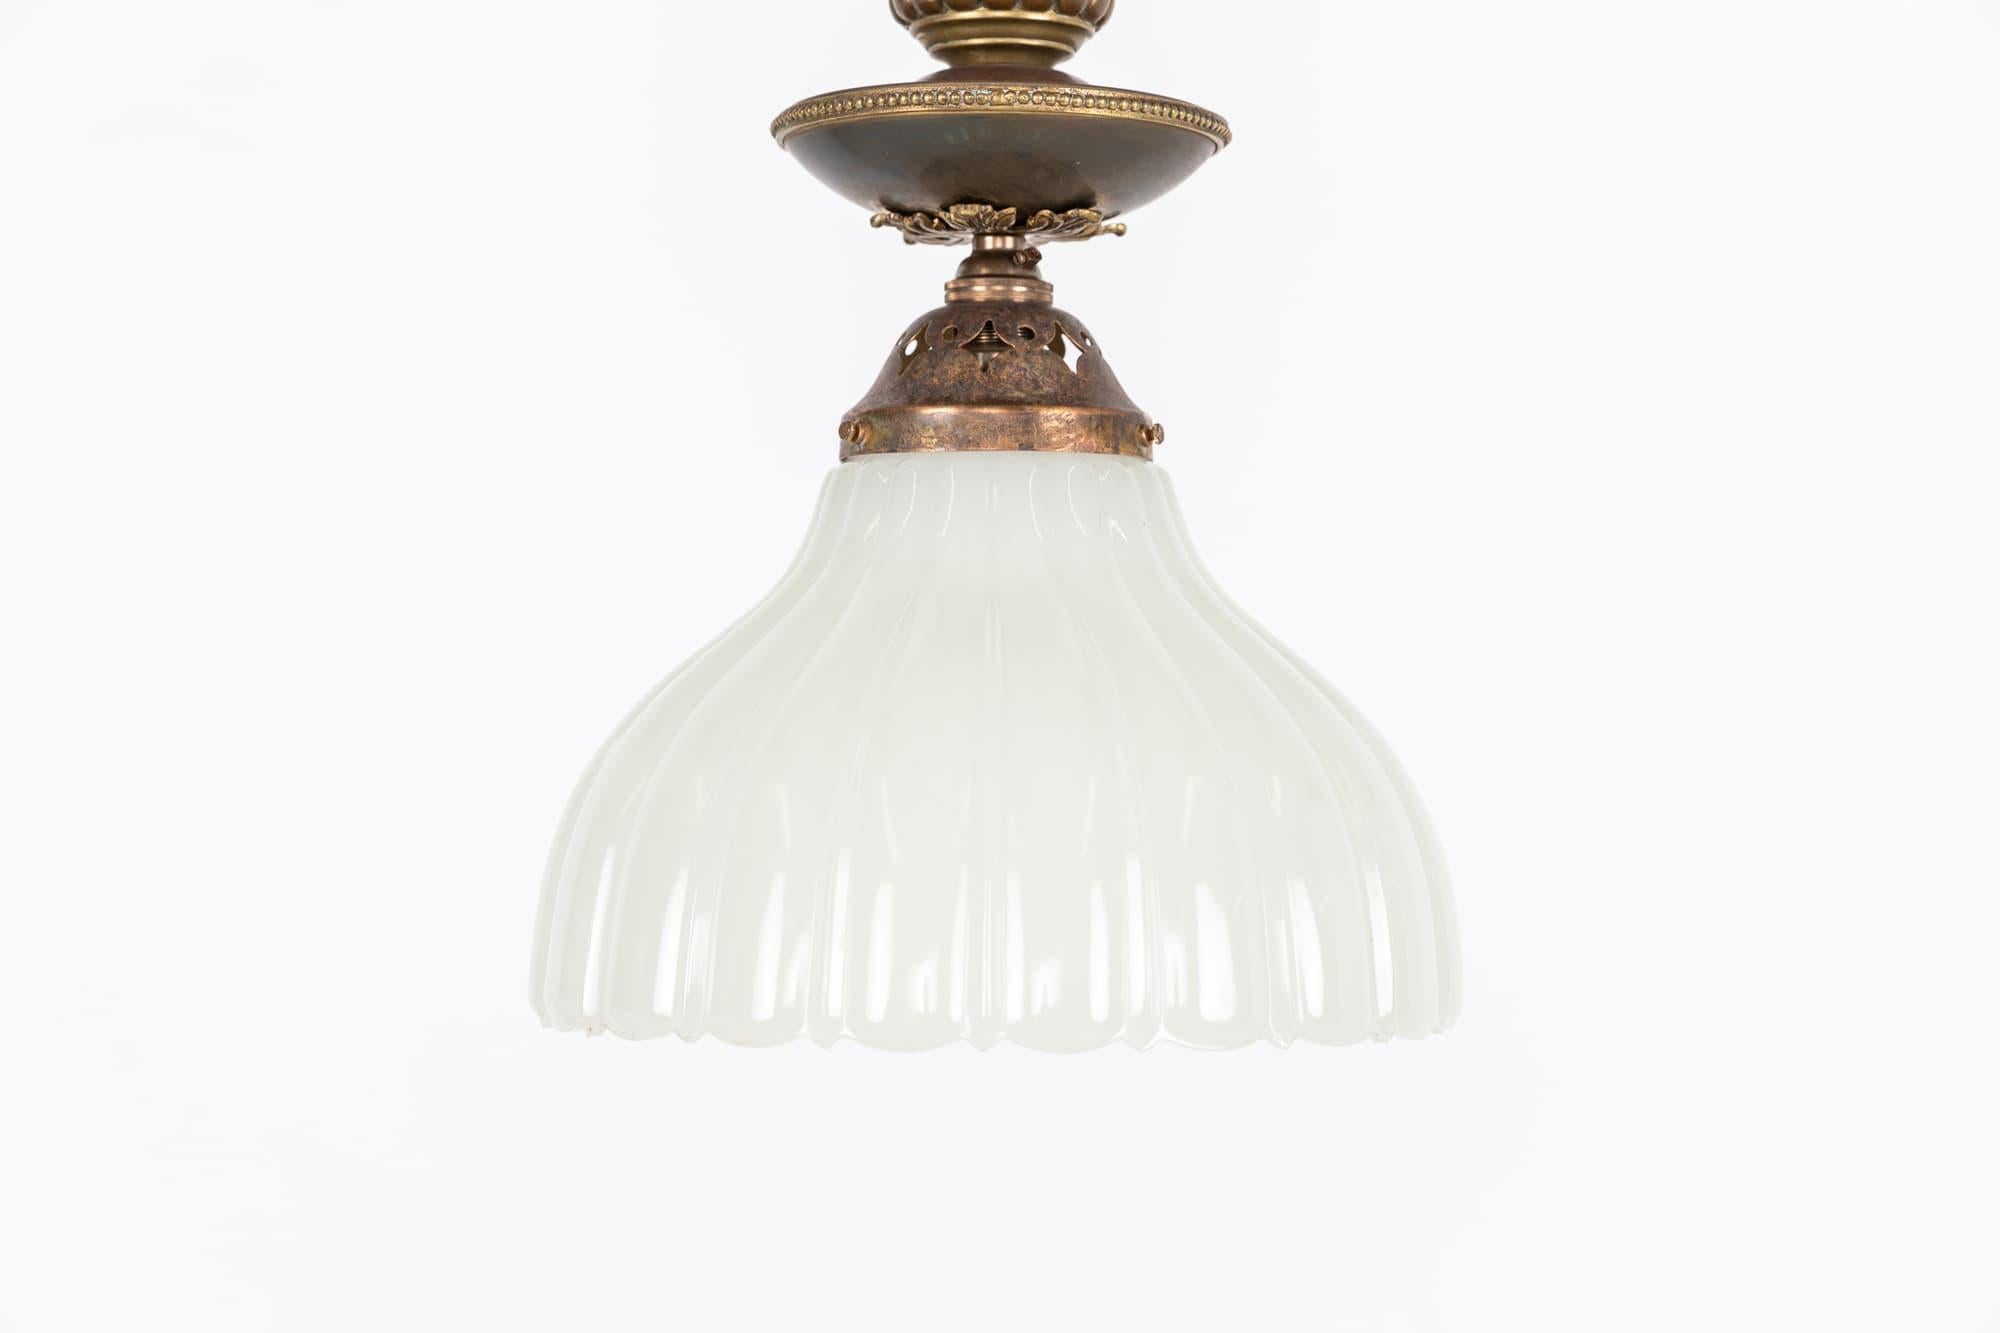 An incredibly elegant moonstone pendant lamp with brass gallery. c.1930

Thick pressed moonstone glass of fluted design with elongated brass gallery.

Rewired with black twisted flex.
